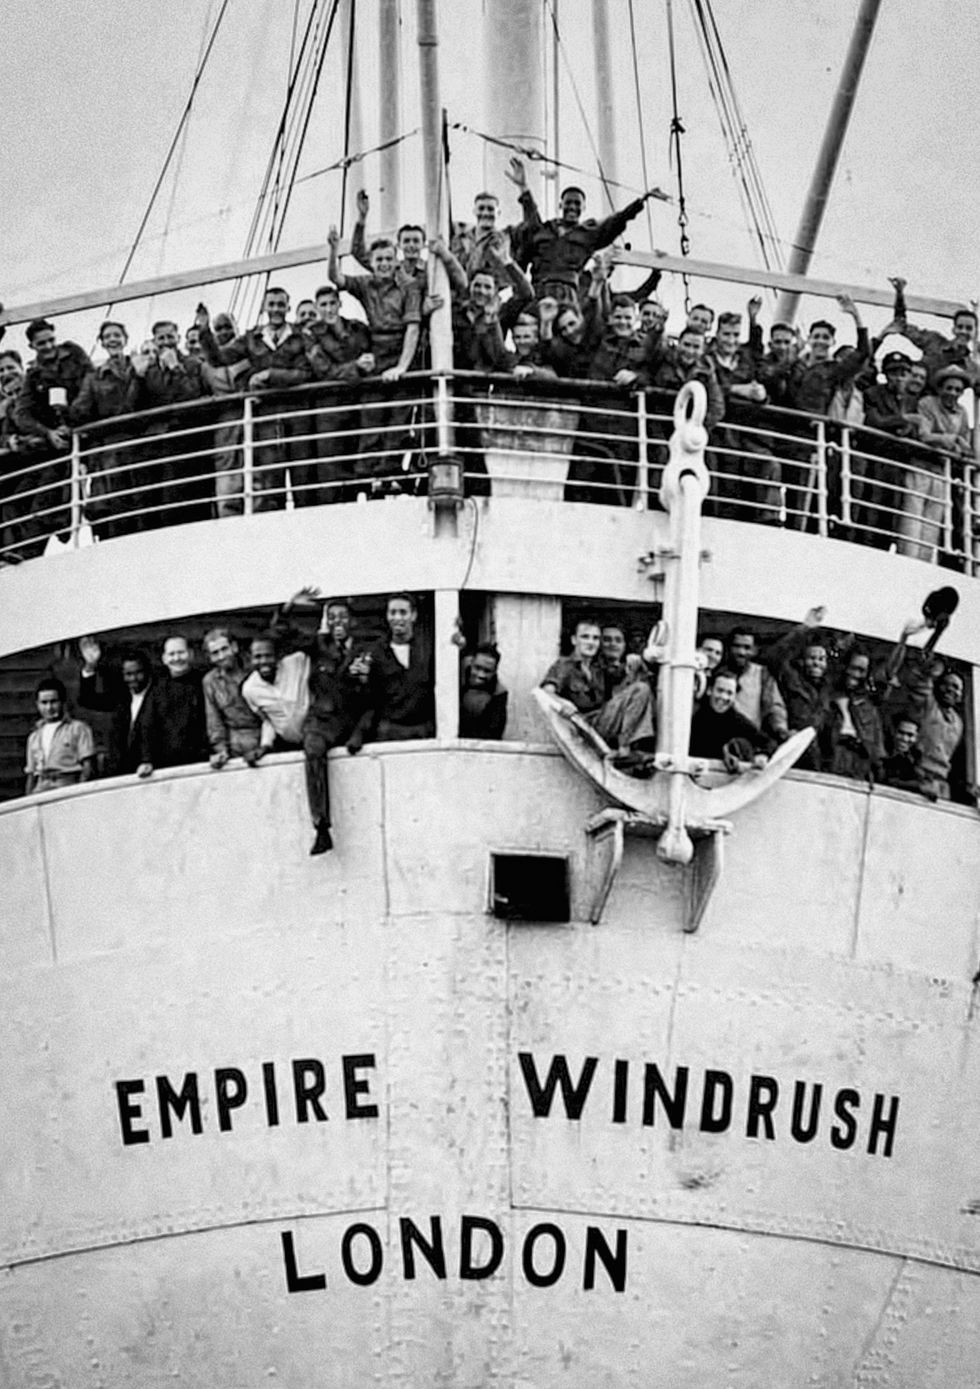 Windrush anchor to be recovered and displayed as ‘symbol of hope and belonging’